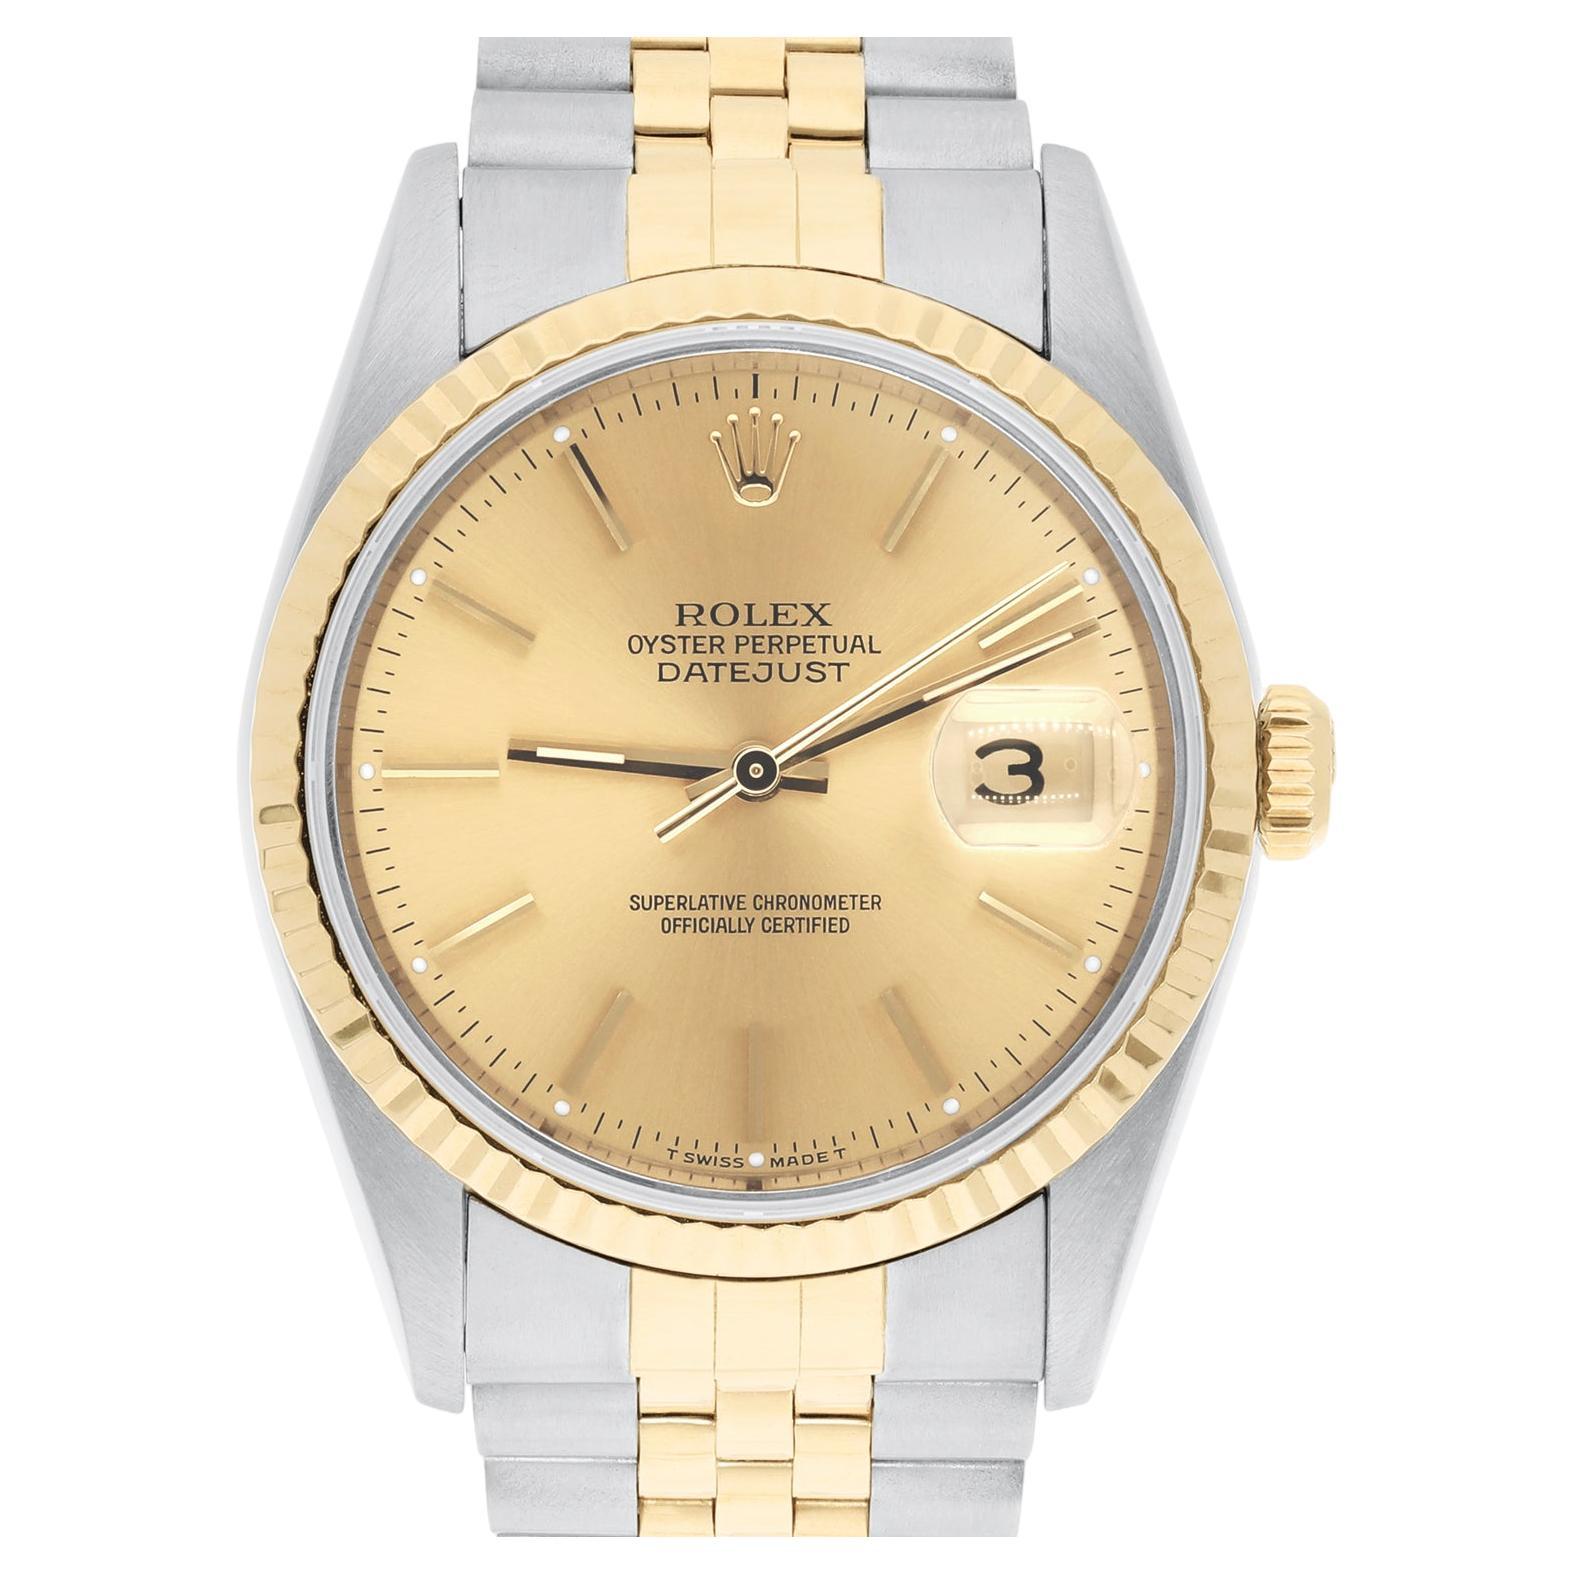 Rolex Datejust 36 Two Tone Champagne Dial Jubilee Band 16233 Circa 1993